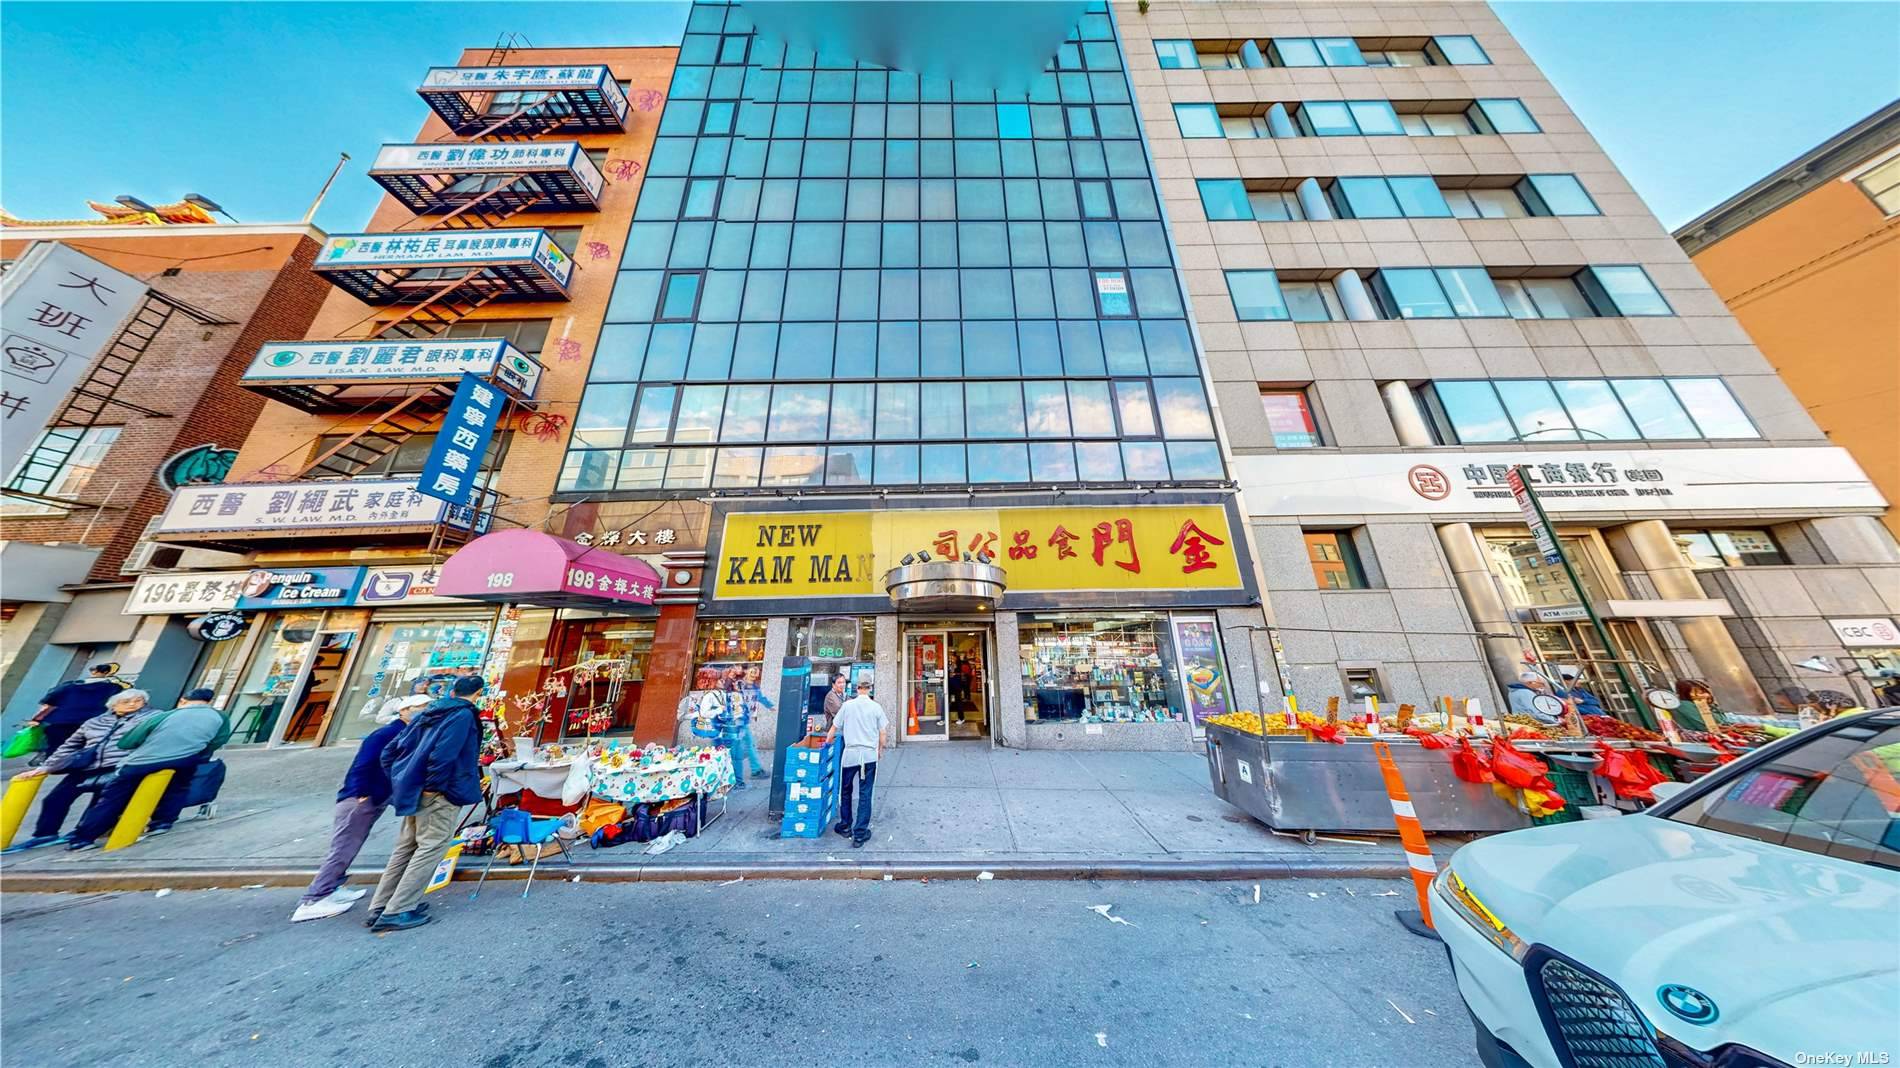 This 1847 gross sqft commercial condo is perfectly located in the bustling heart of Chinatown, between Mott and Mulberry Streets on Canal Street's south side.